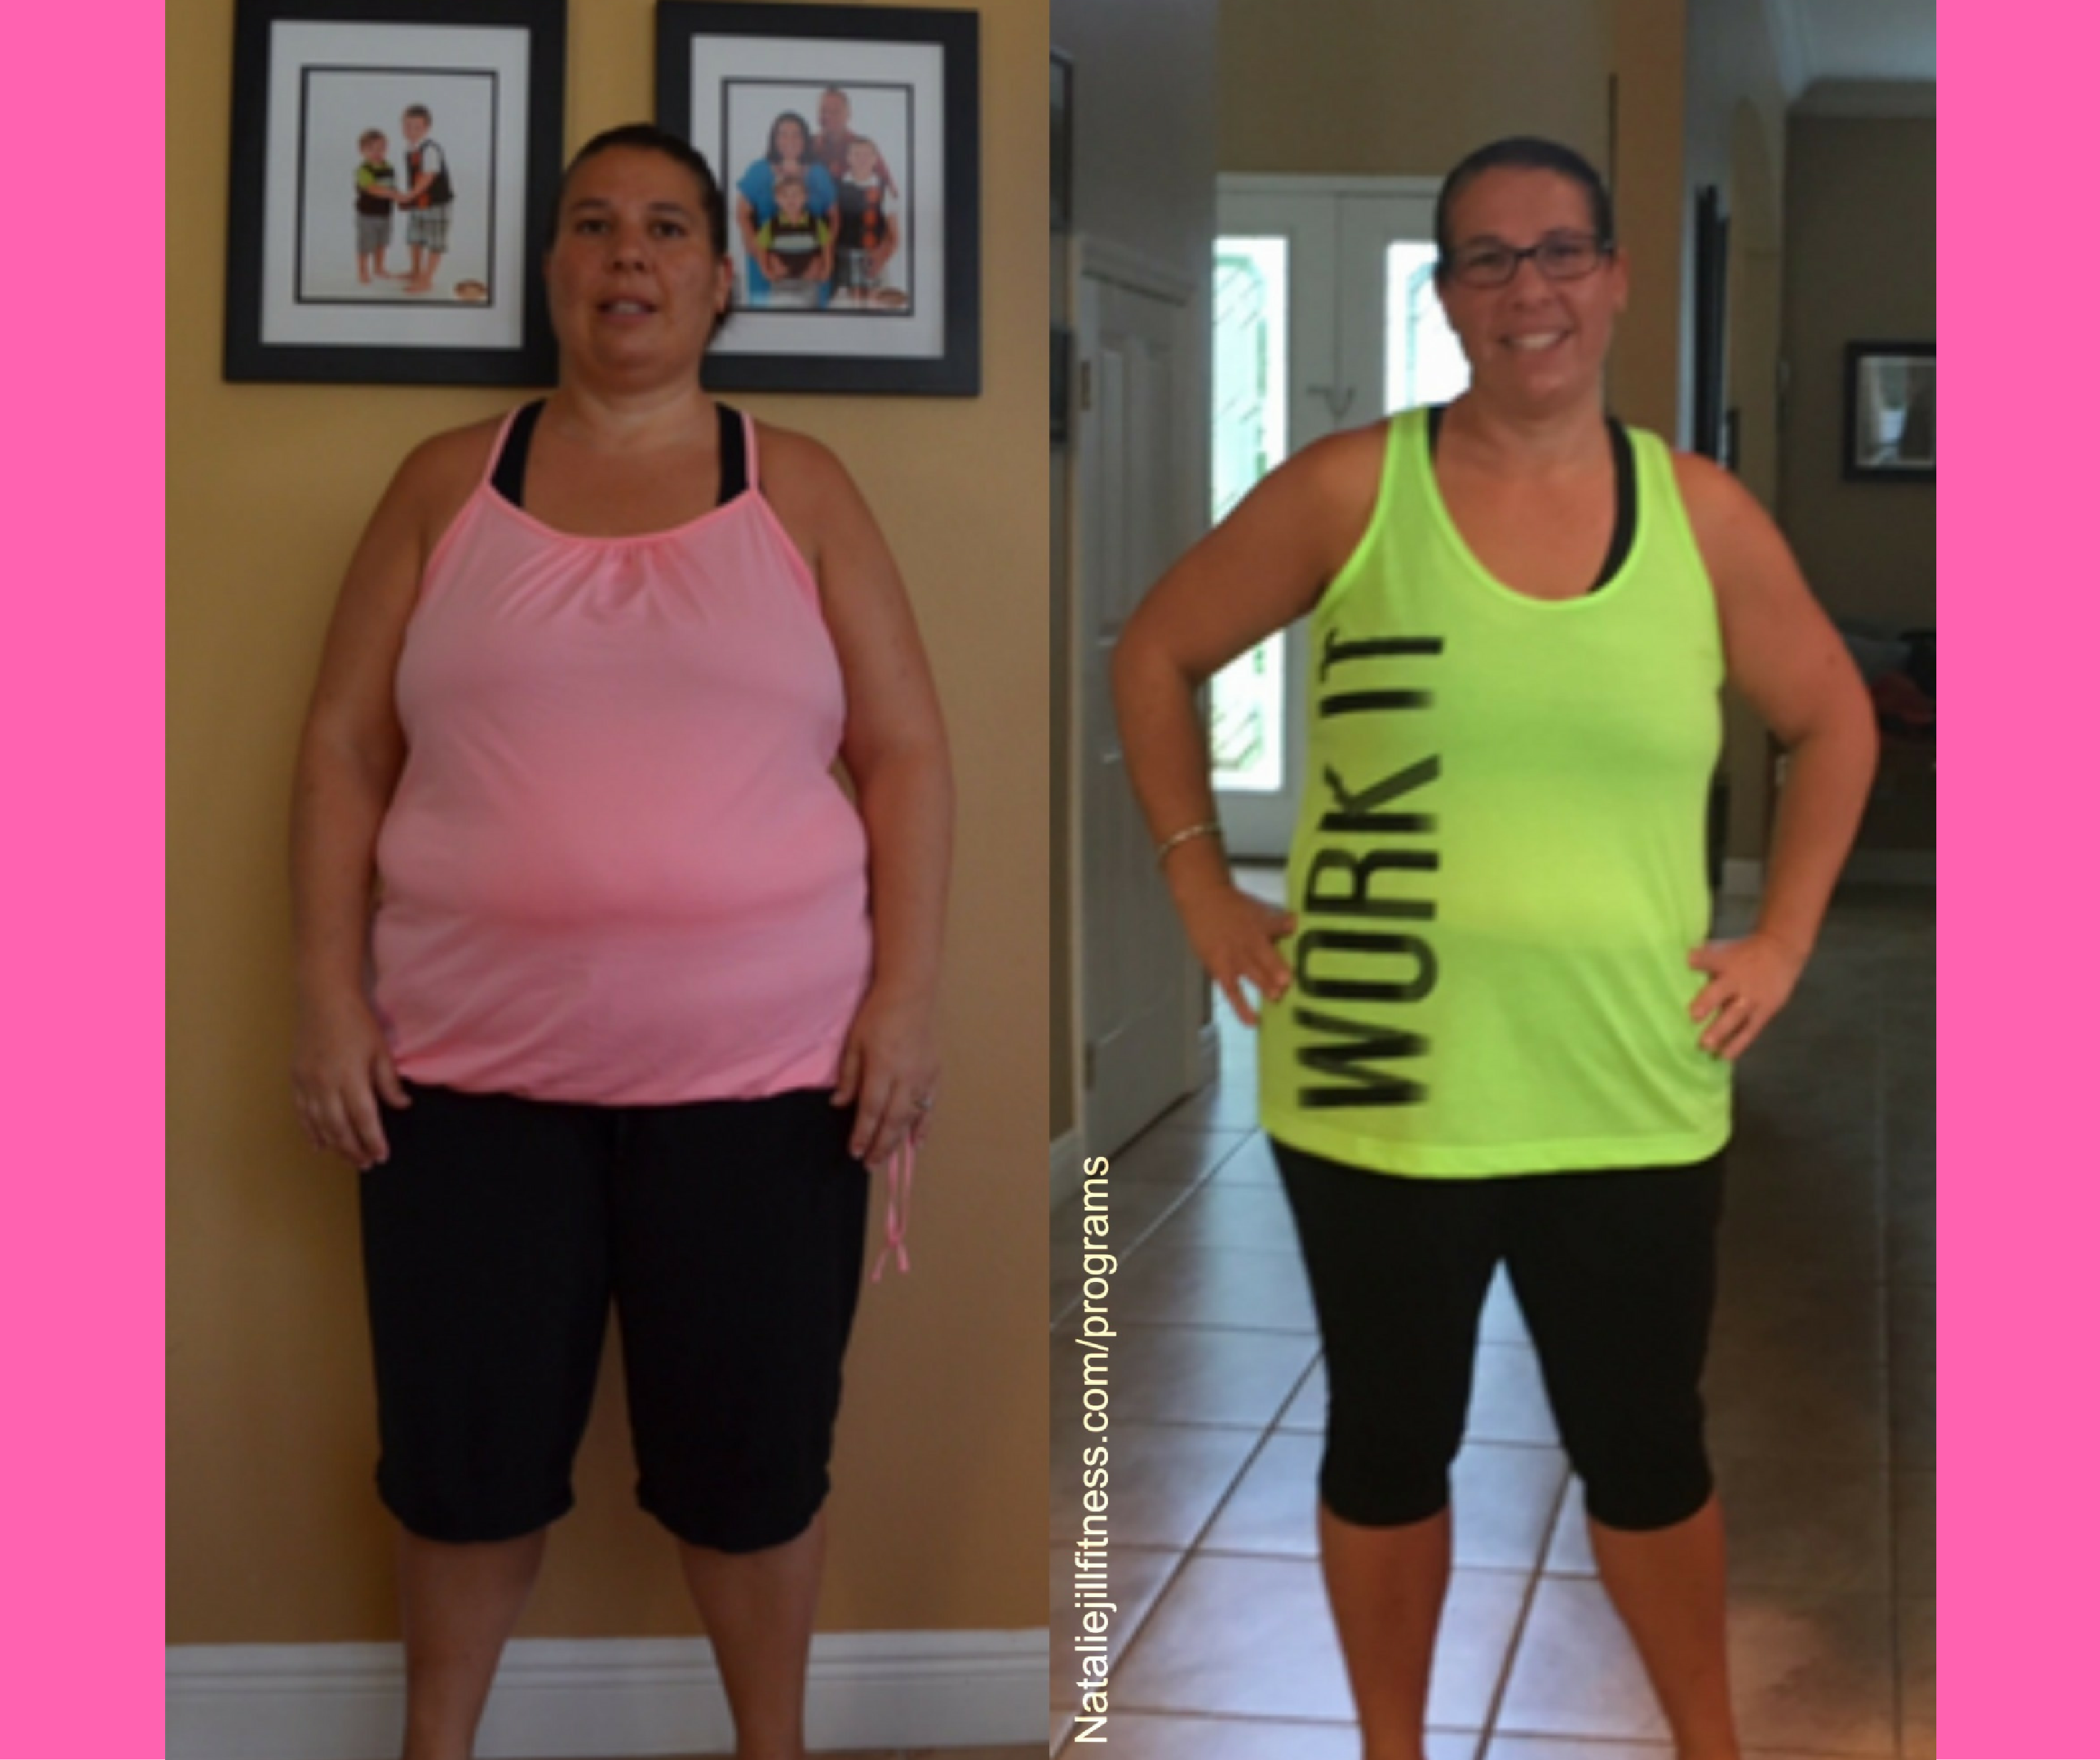 Meet Jacqueline! Down 30 pounds and stronger than ever!